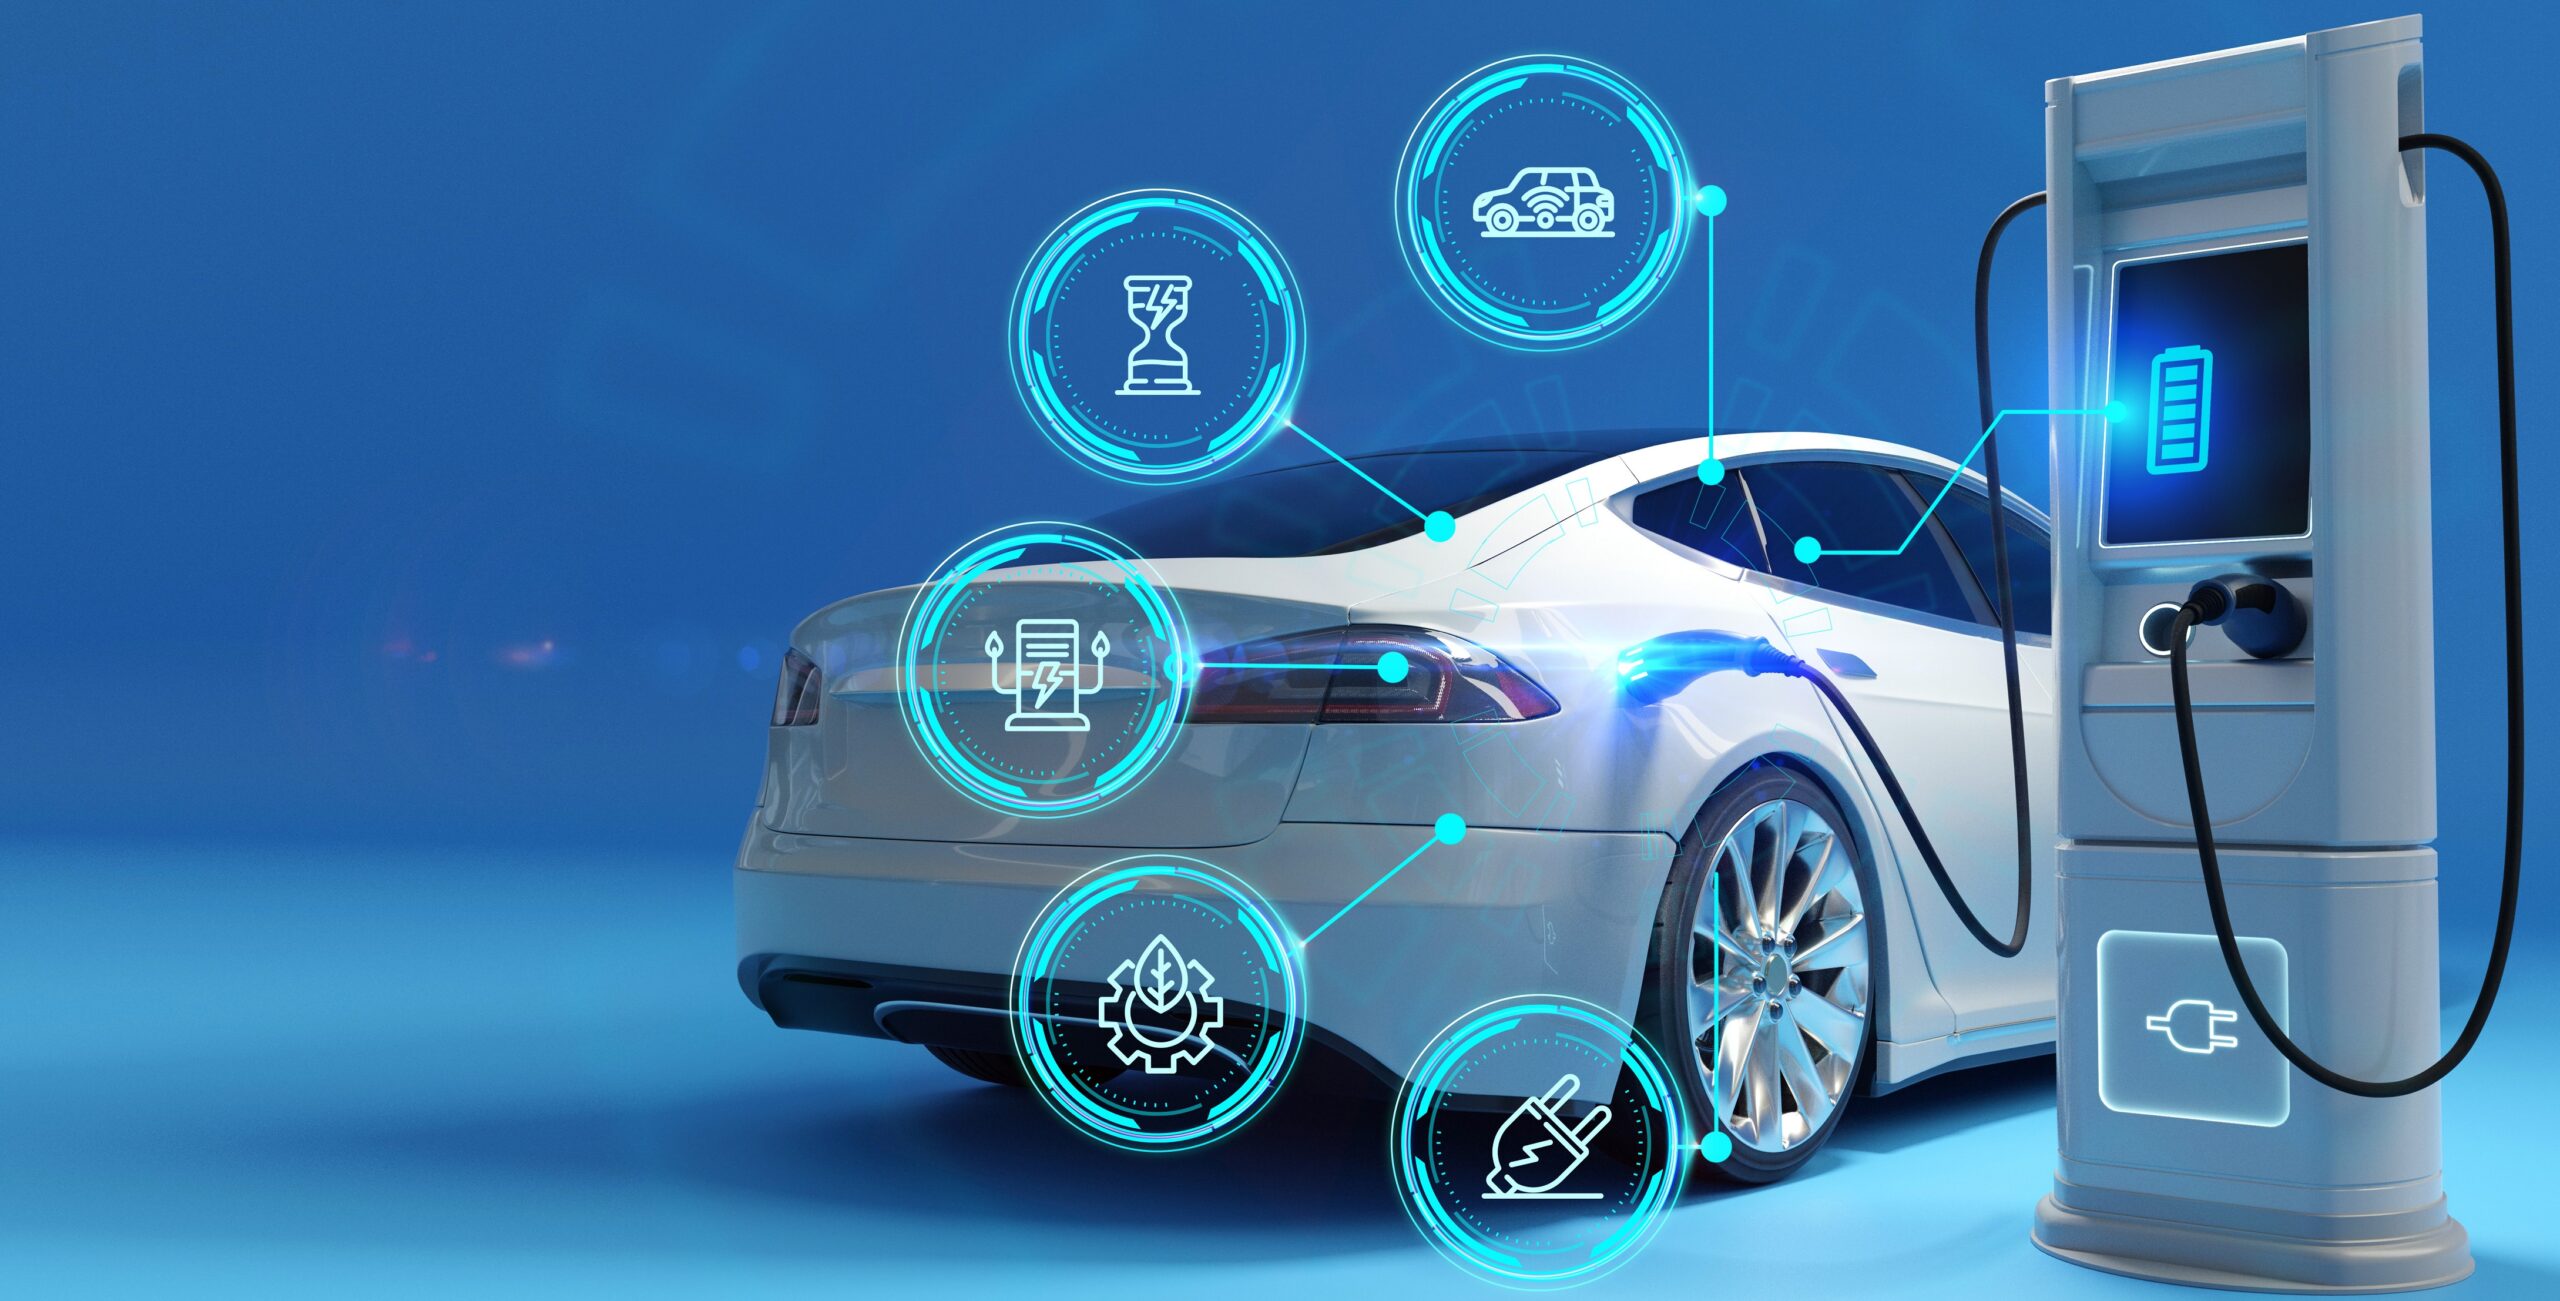 The role of simulation and testing in automotive. Get ready to transform the development process to make it fit for the future.